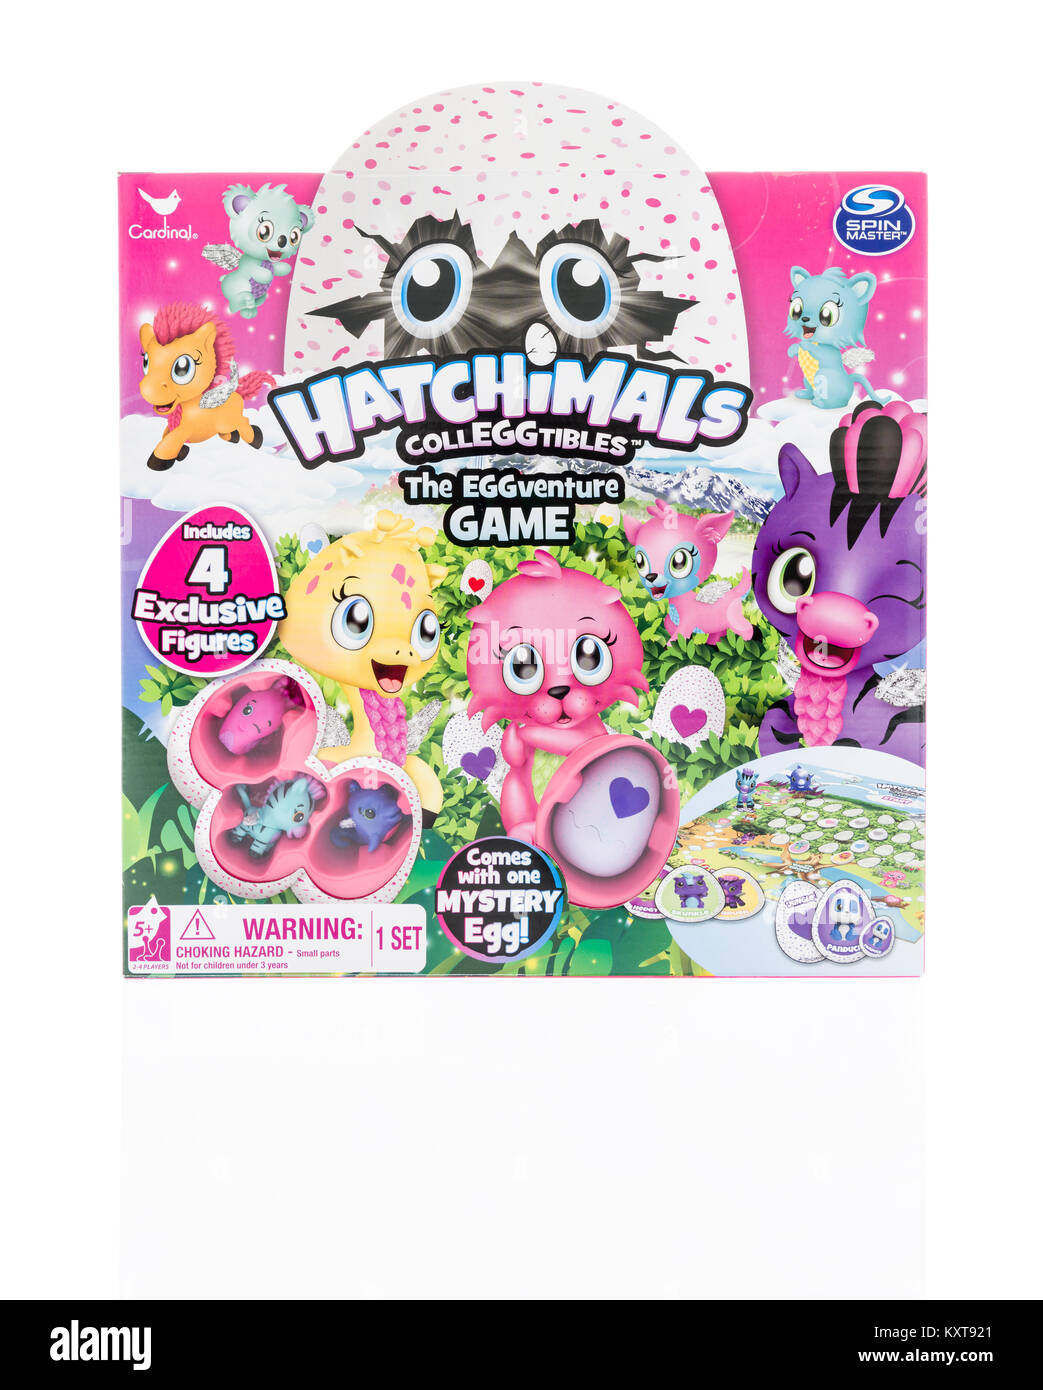 Winneconne, WI -25 December 2017: A box of Hatchimals colleggtibles the eggventure game on an isolated background. Stock Photo